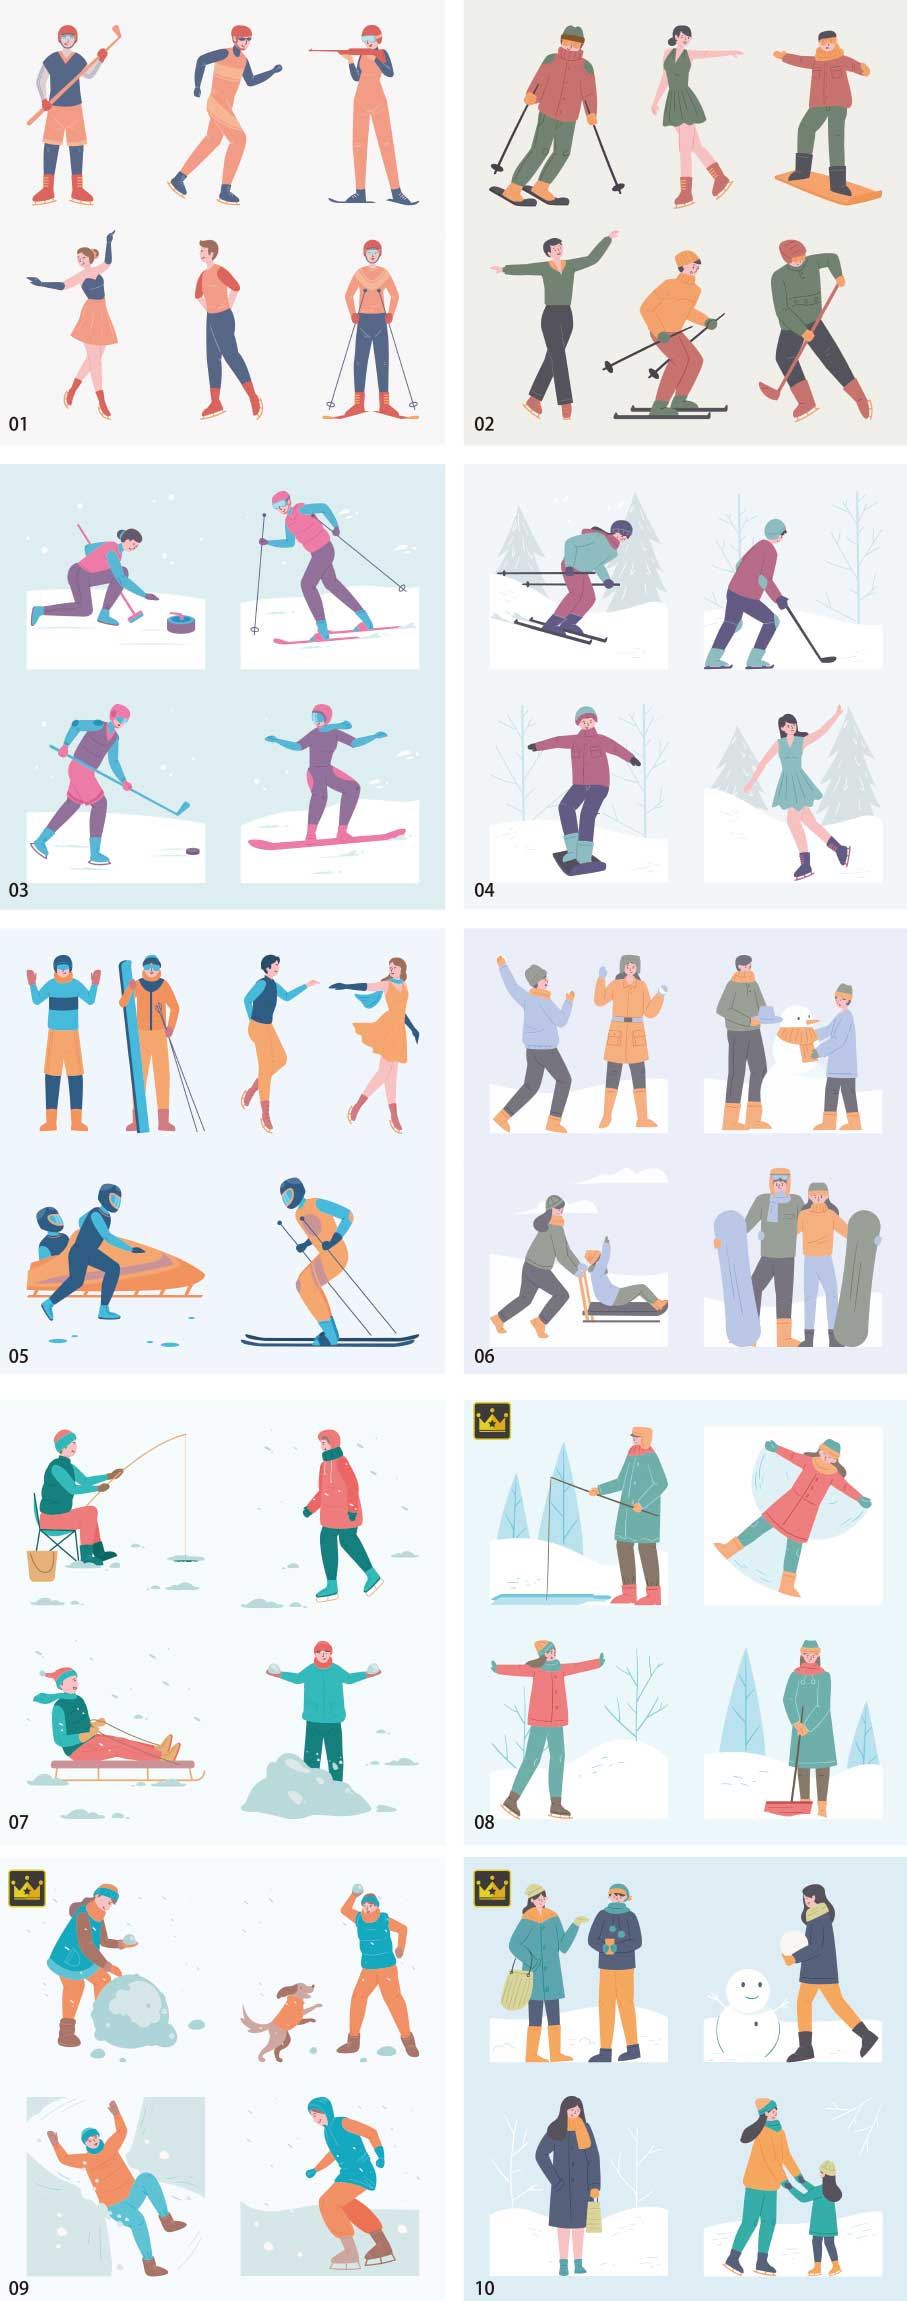 Winter sports illustration collection vol.2